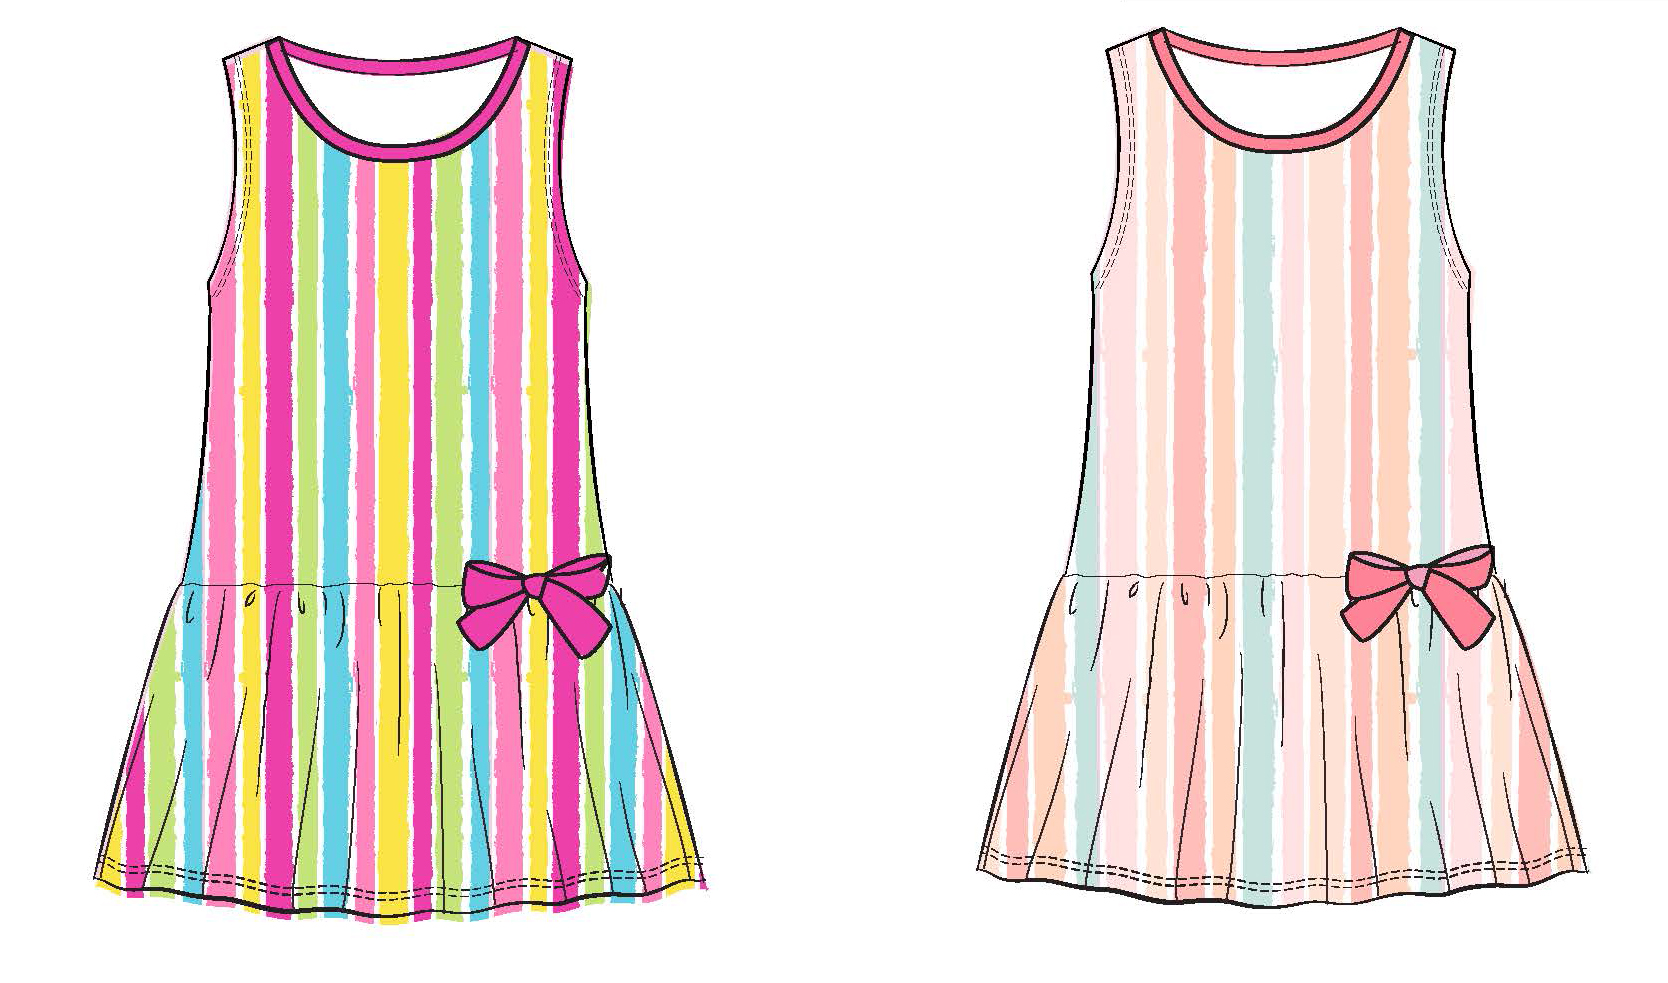 Toddler Girl's Sleeveless Knit Swing DRESS w/ Embroidered Bow - Two Tone Rainbow Stripes - Size 2T-4